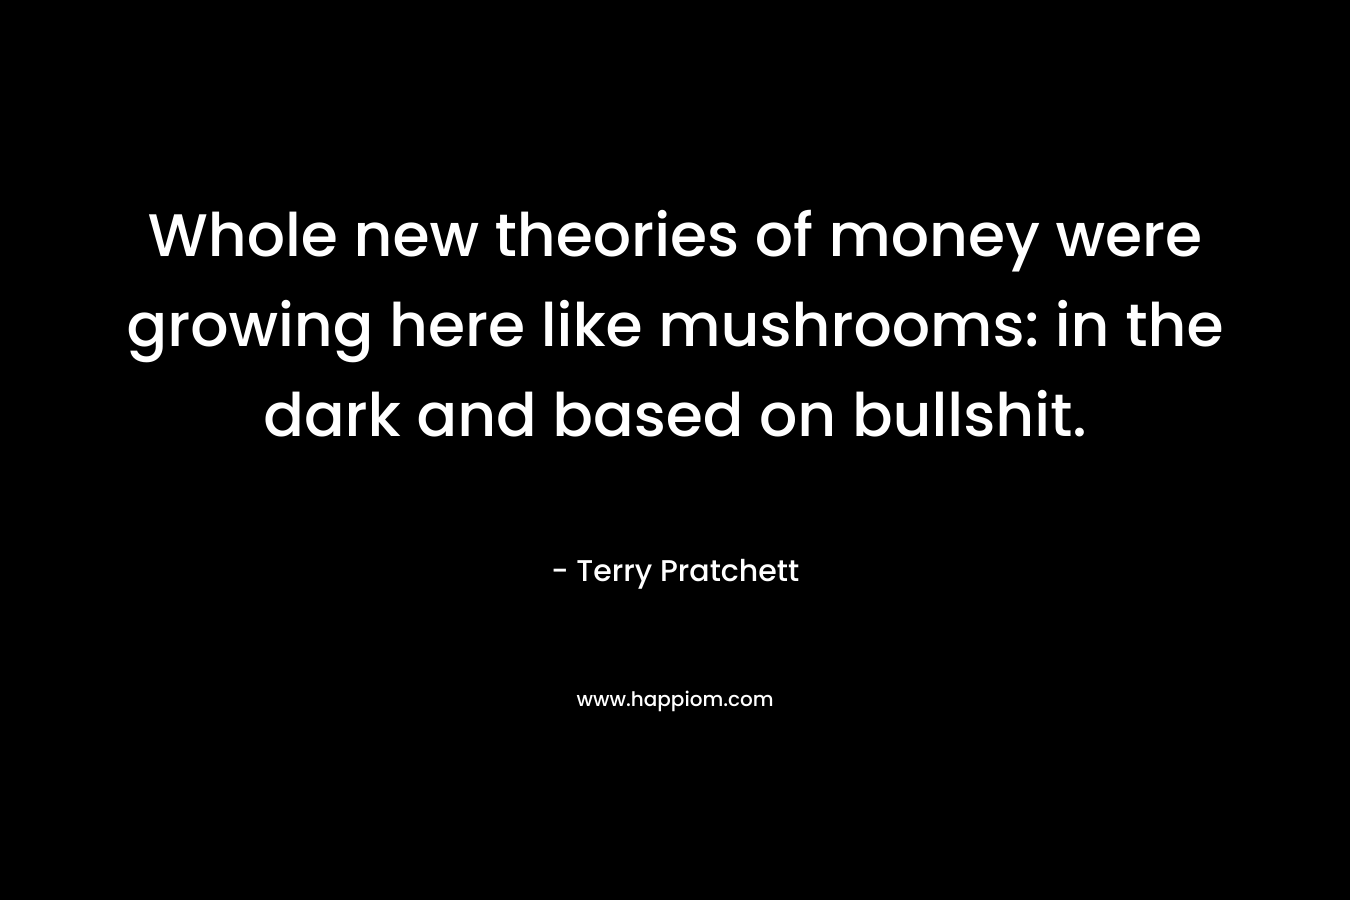 Whole new theories of money were growing here like mushrooms: in the dark and based on bullshit.